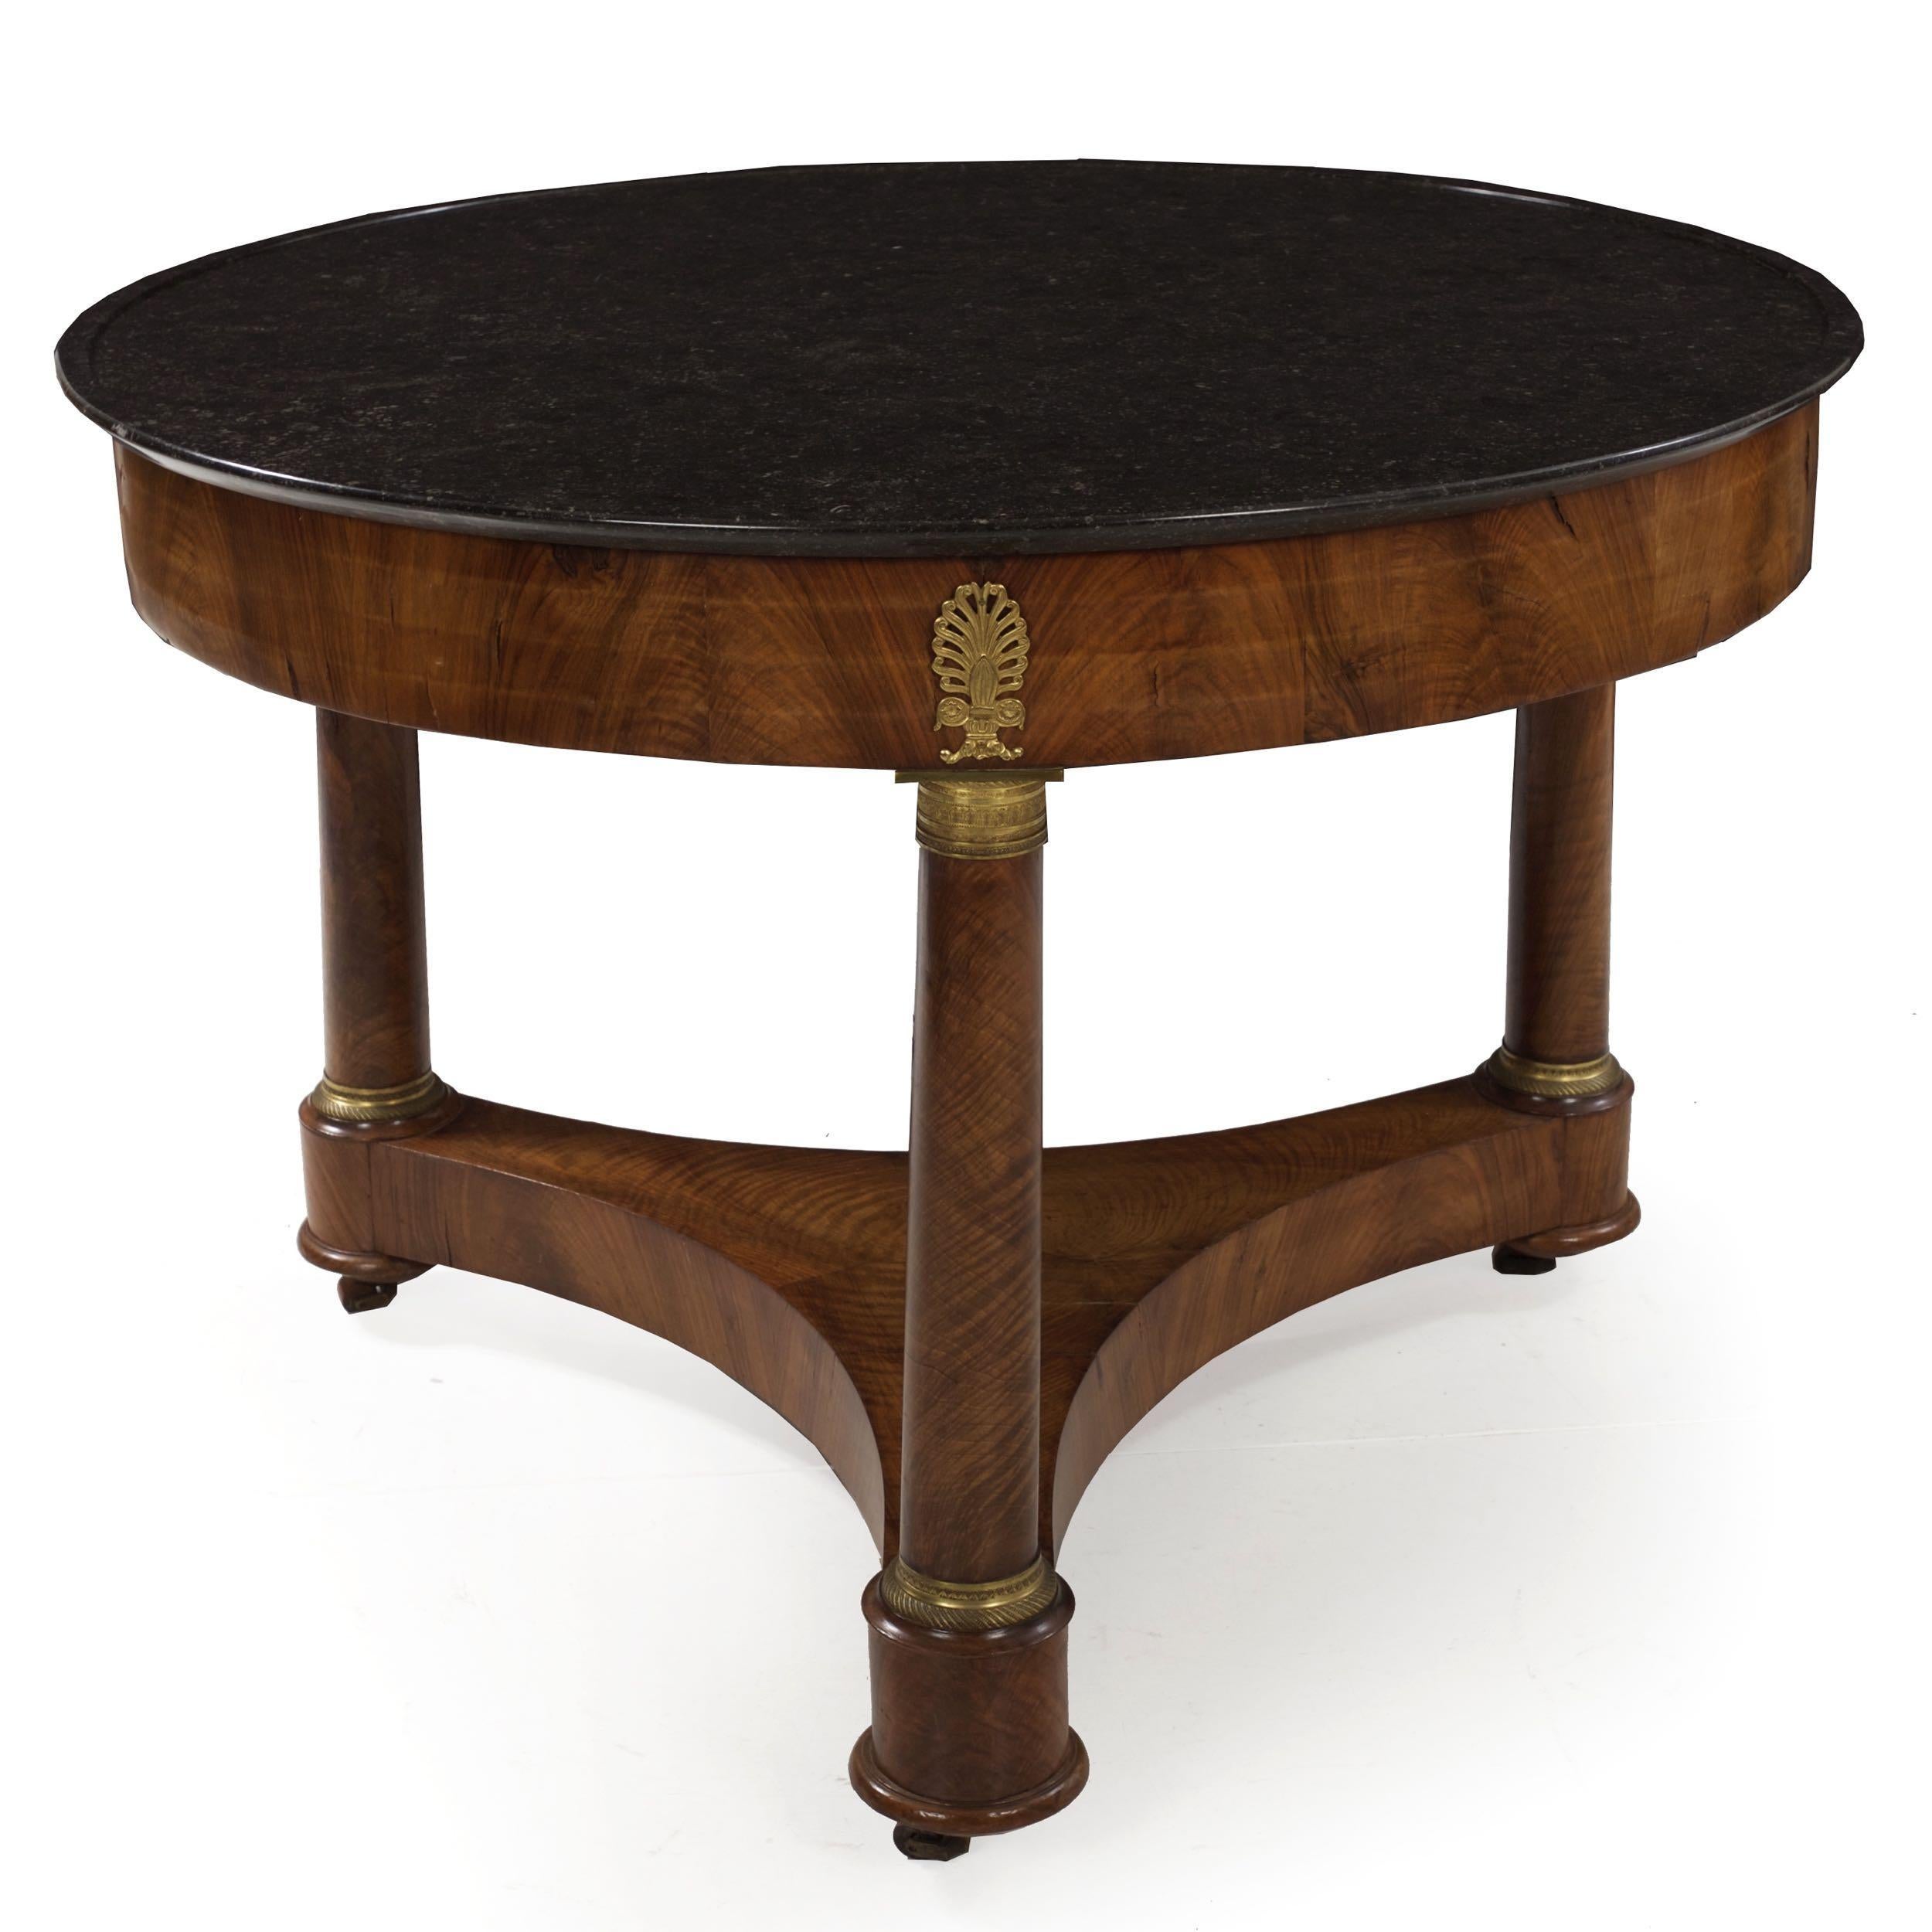 19th Century French Empire Antique Burl Walnut Center Table with Black Marble Top, circa 1815 For Sale